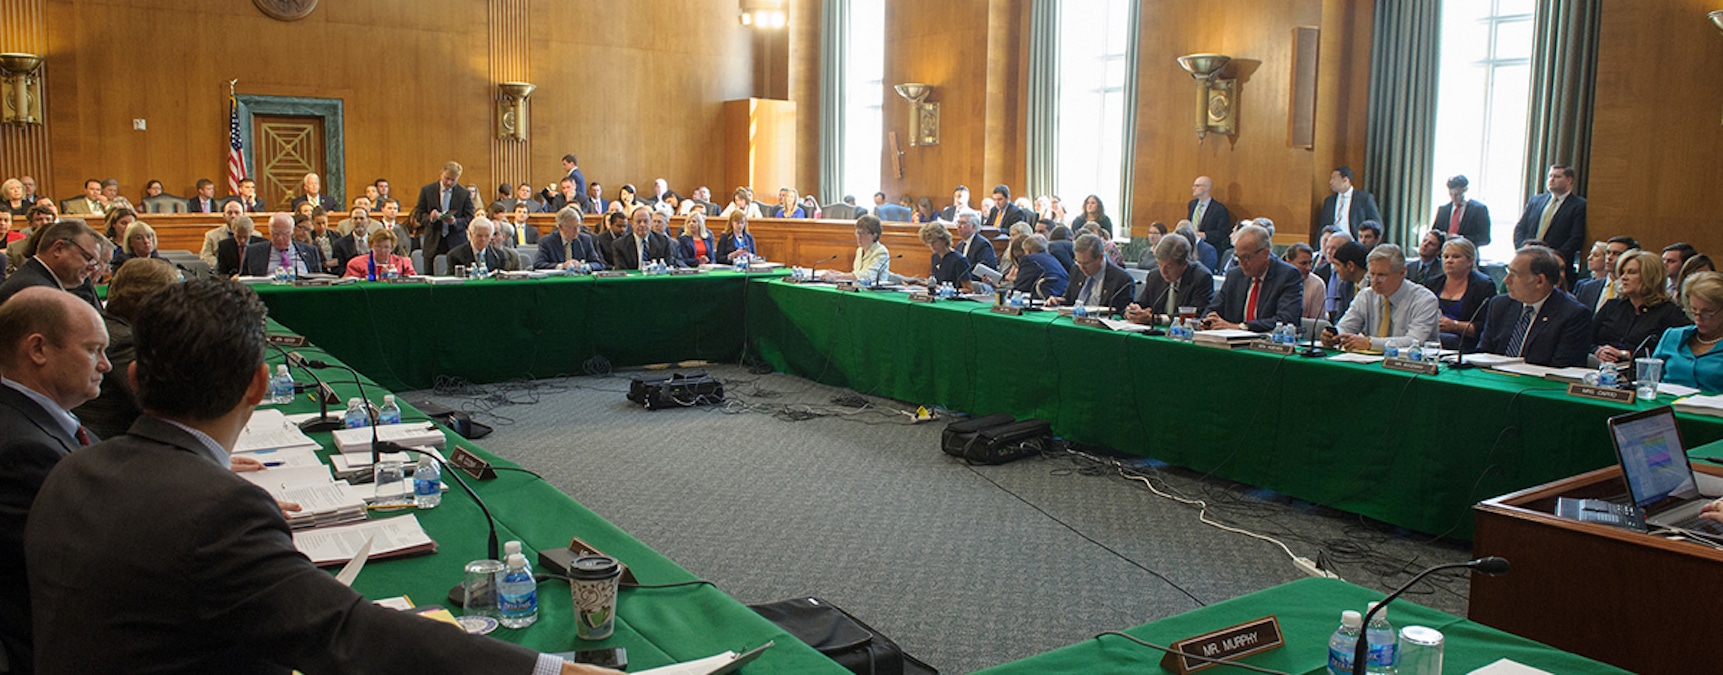 A meeting of the Senate Committee on Appropriations